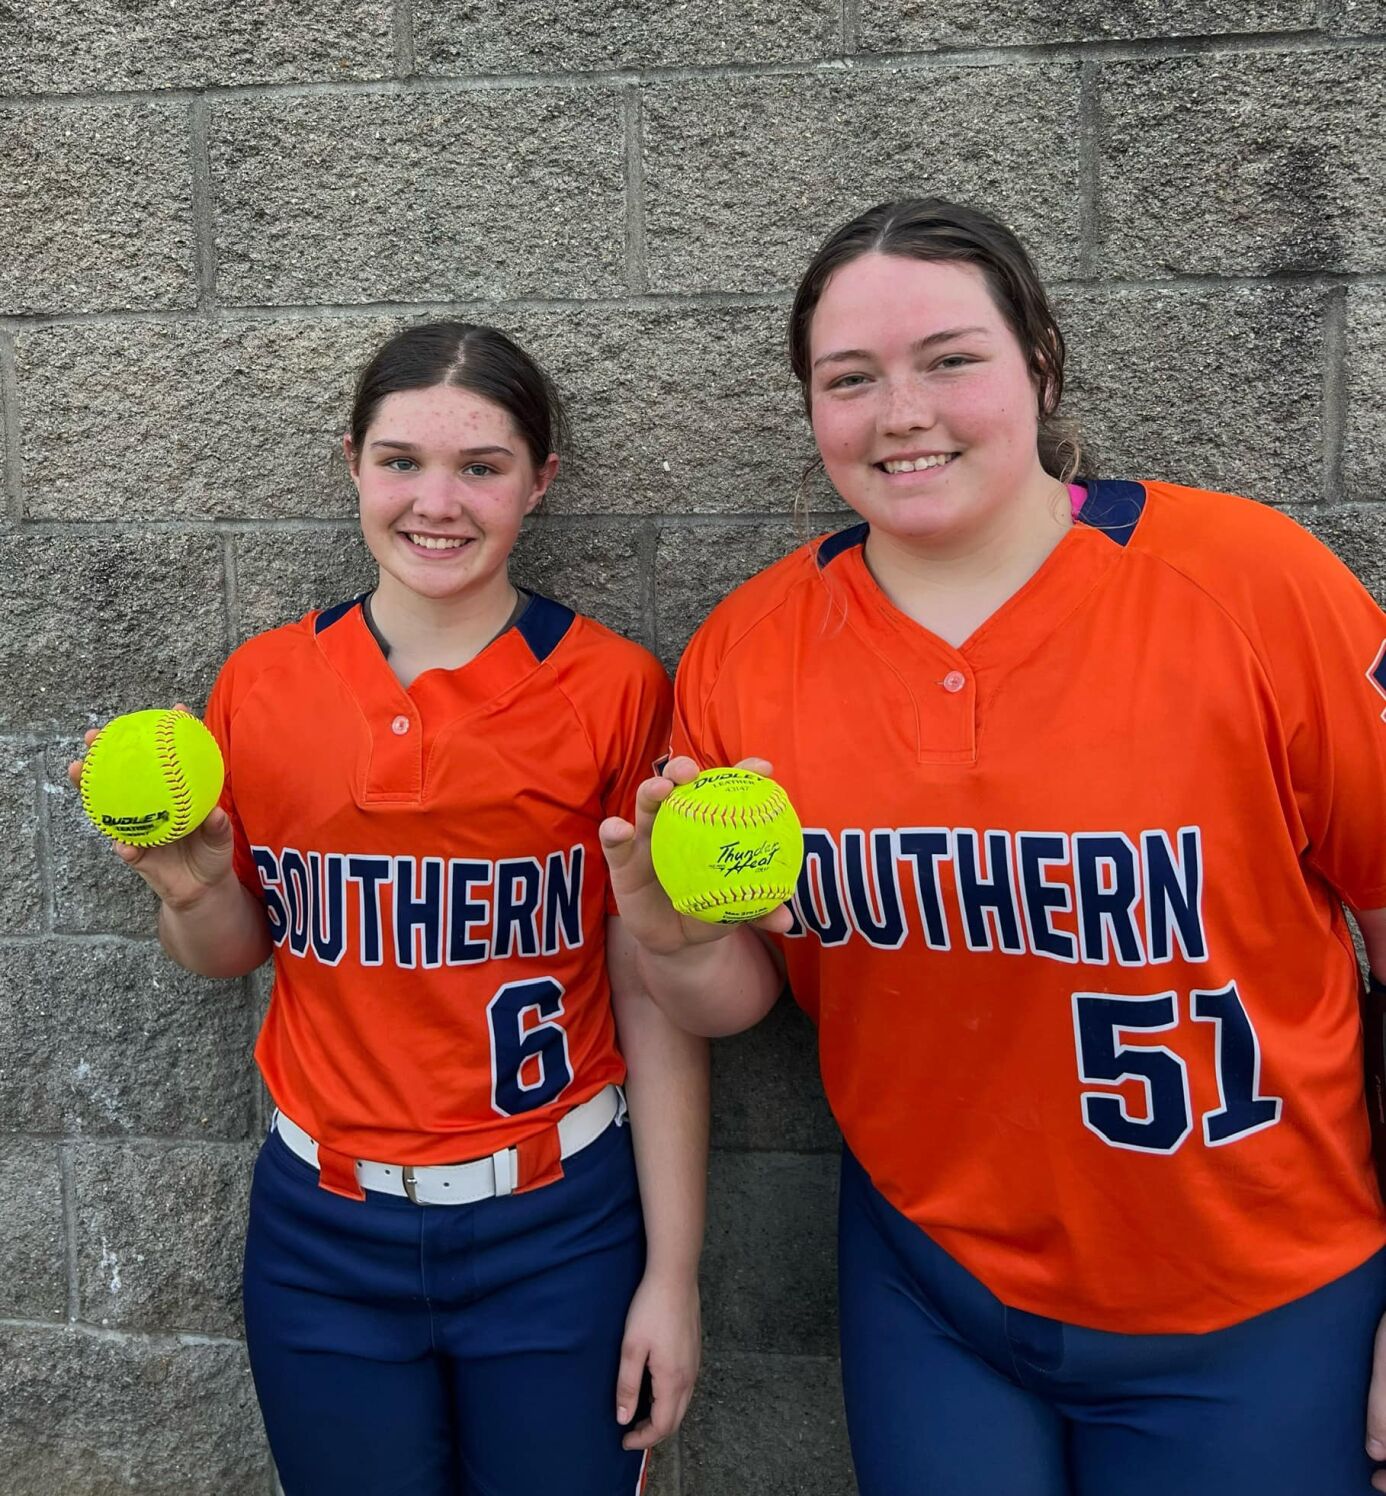 Madison Southern and Central Shine in High School Softball Victories: Key Players Deliver Strong Performances